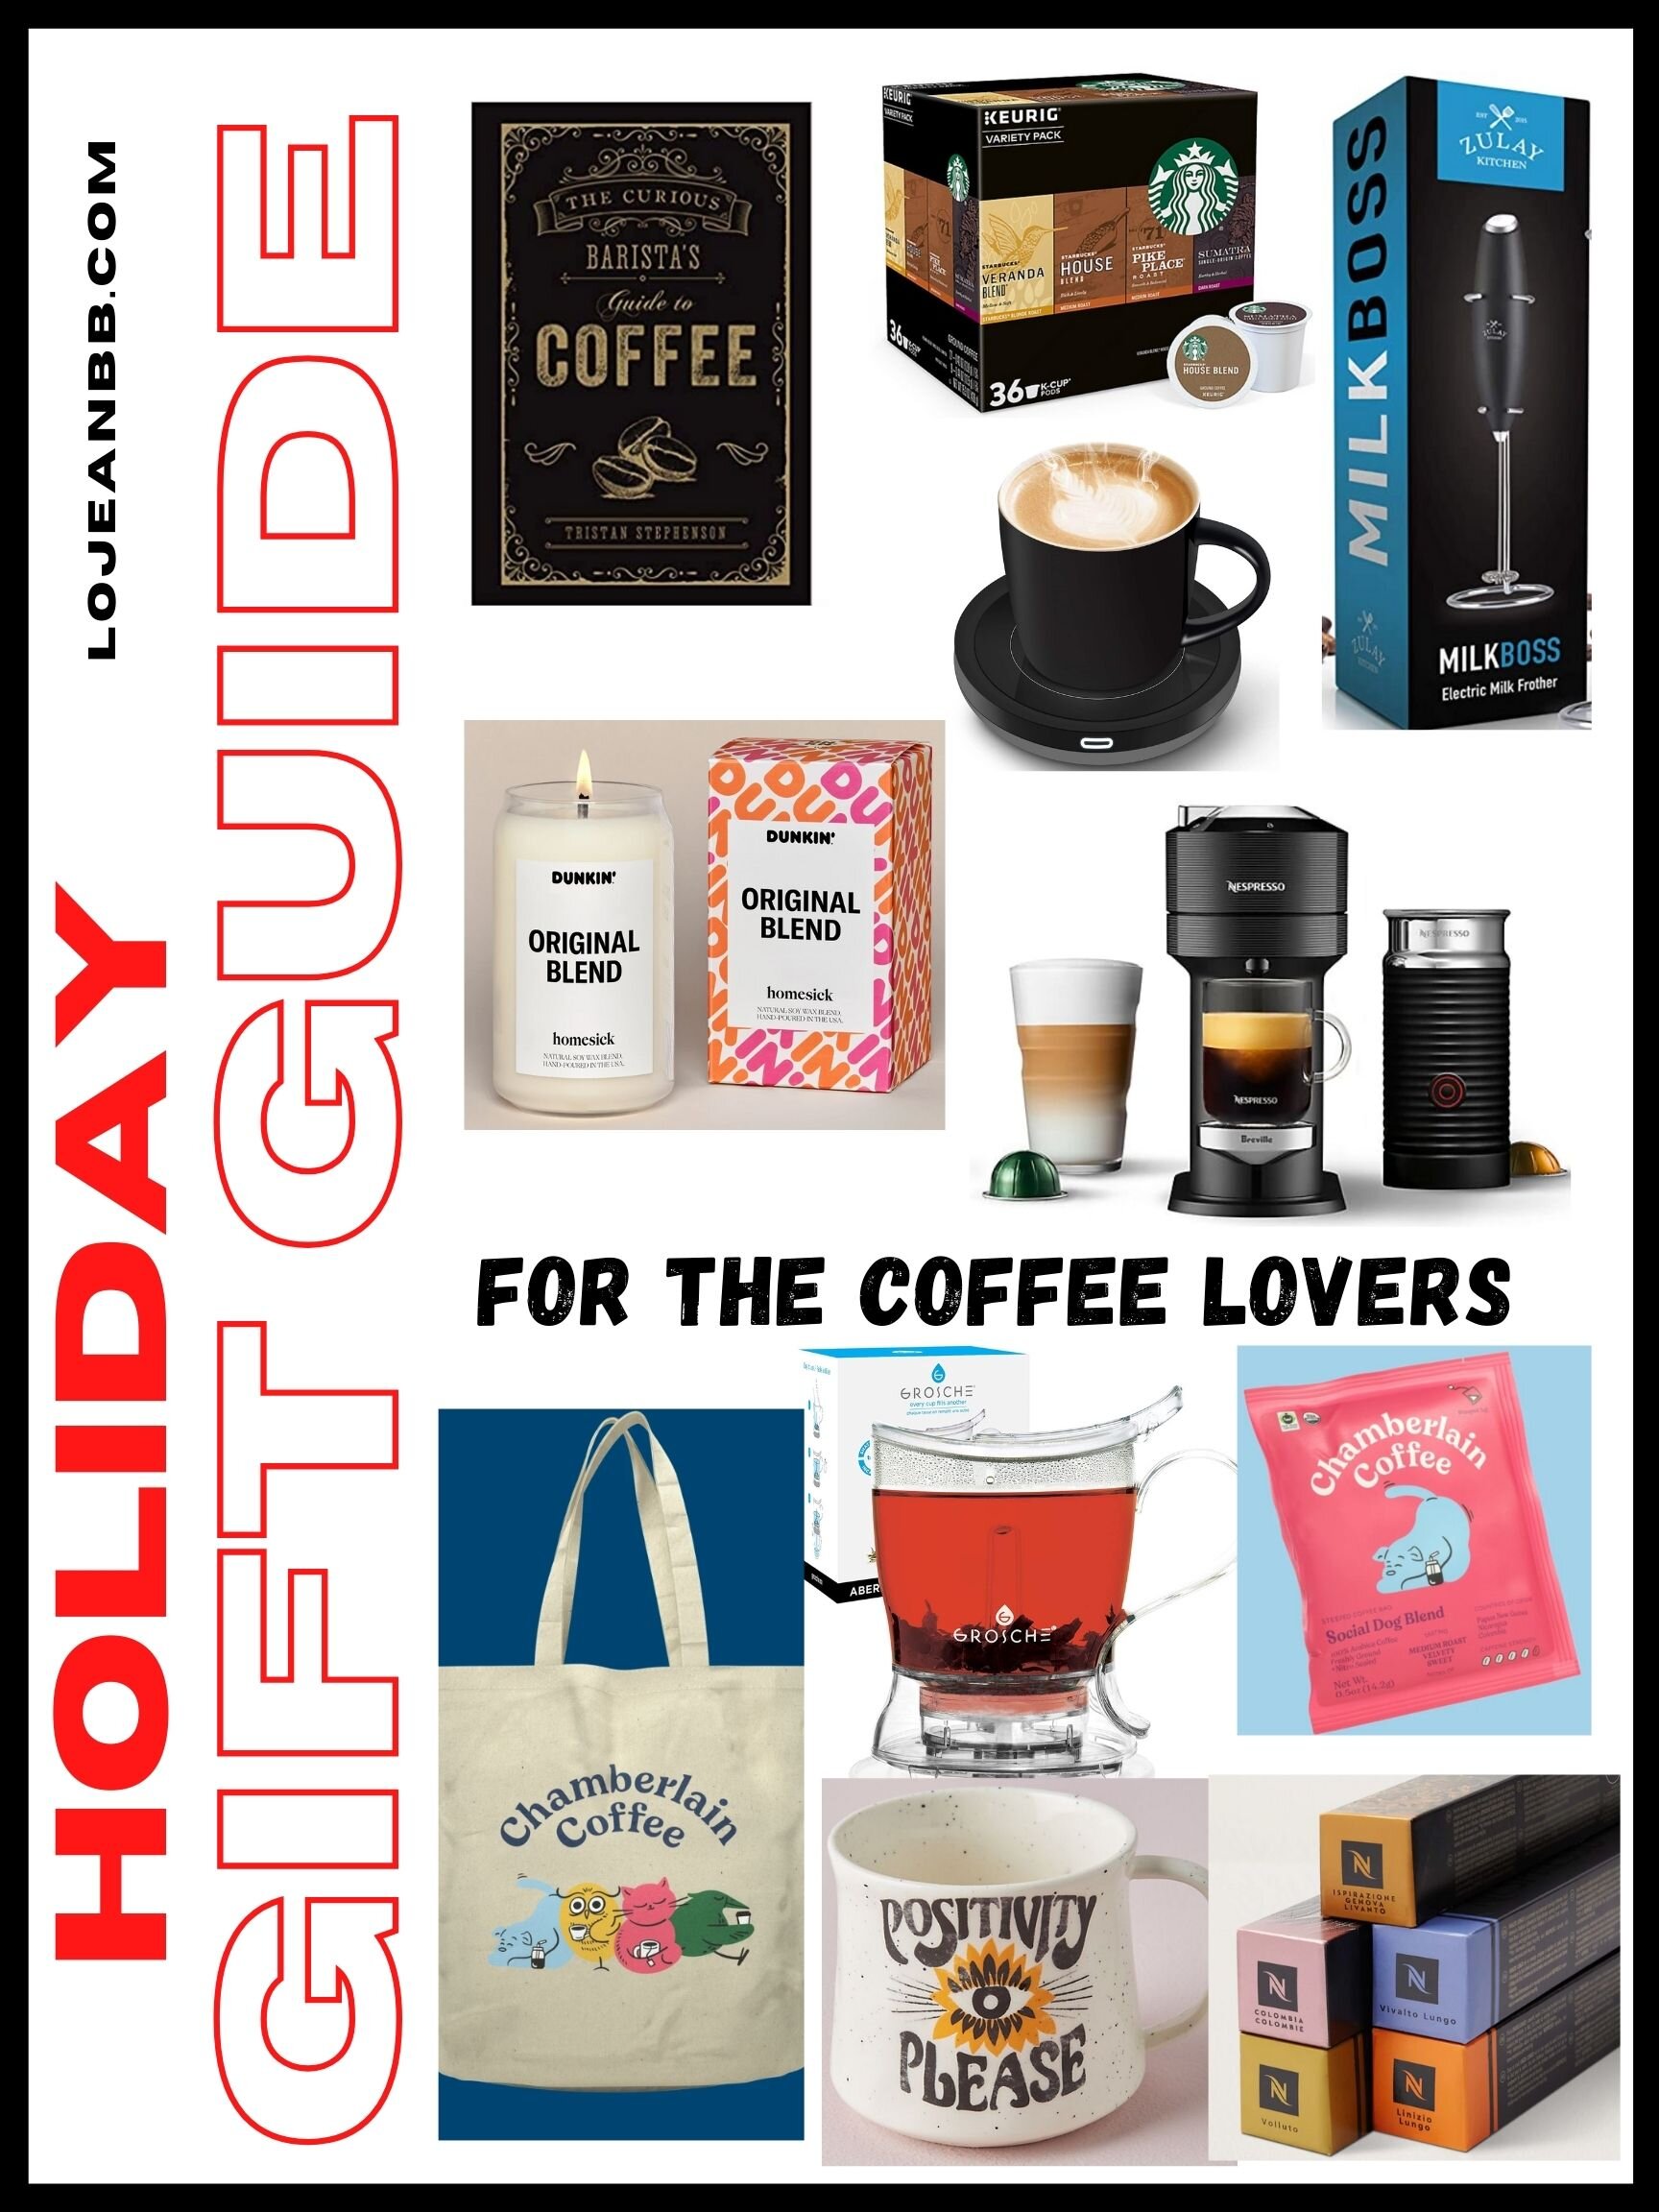 The Best Christmas Coffee Lovers Gift Guide - Lifestyle of a Foodie